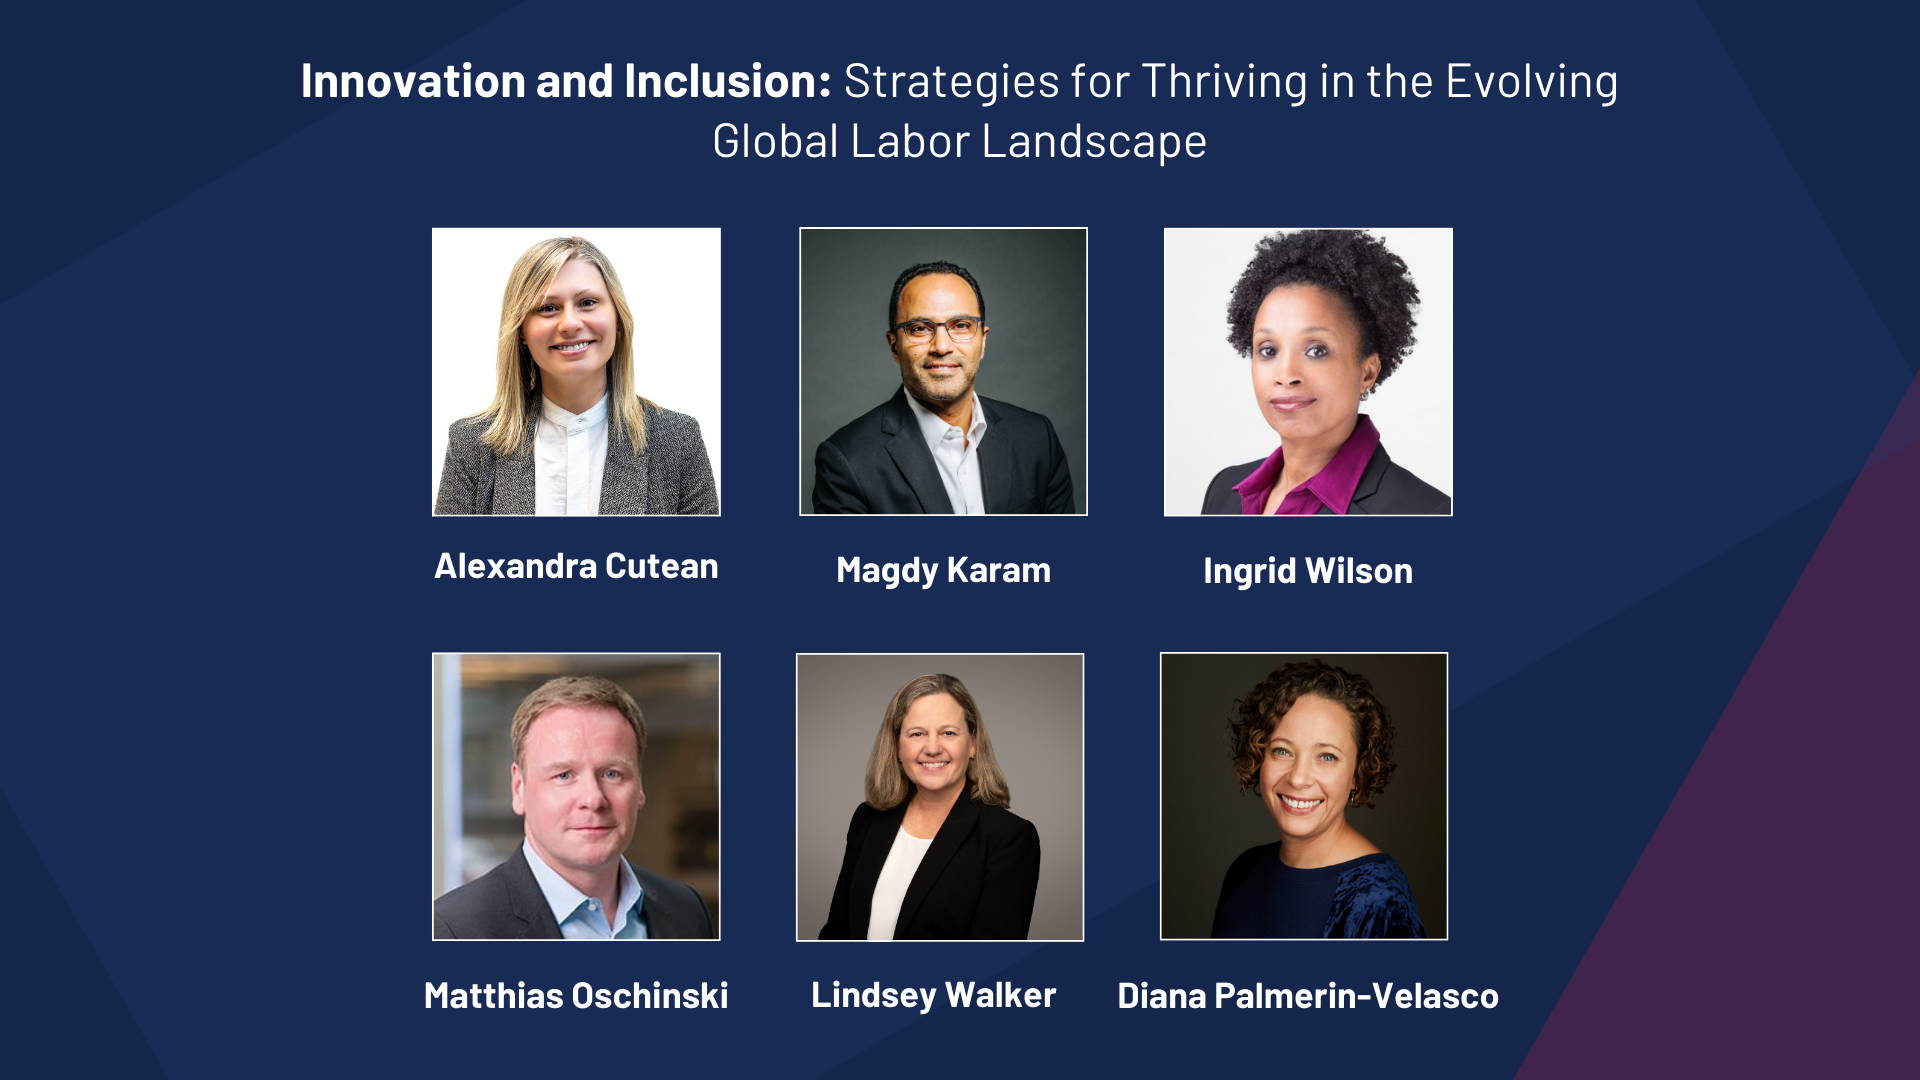 Panel 2: Innovation and Inclusion: Strategies for Thriving in the Evolving Global Labor Landscape